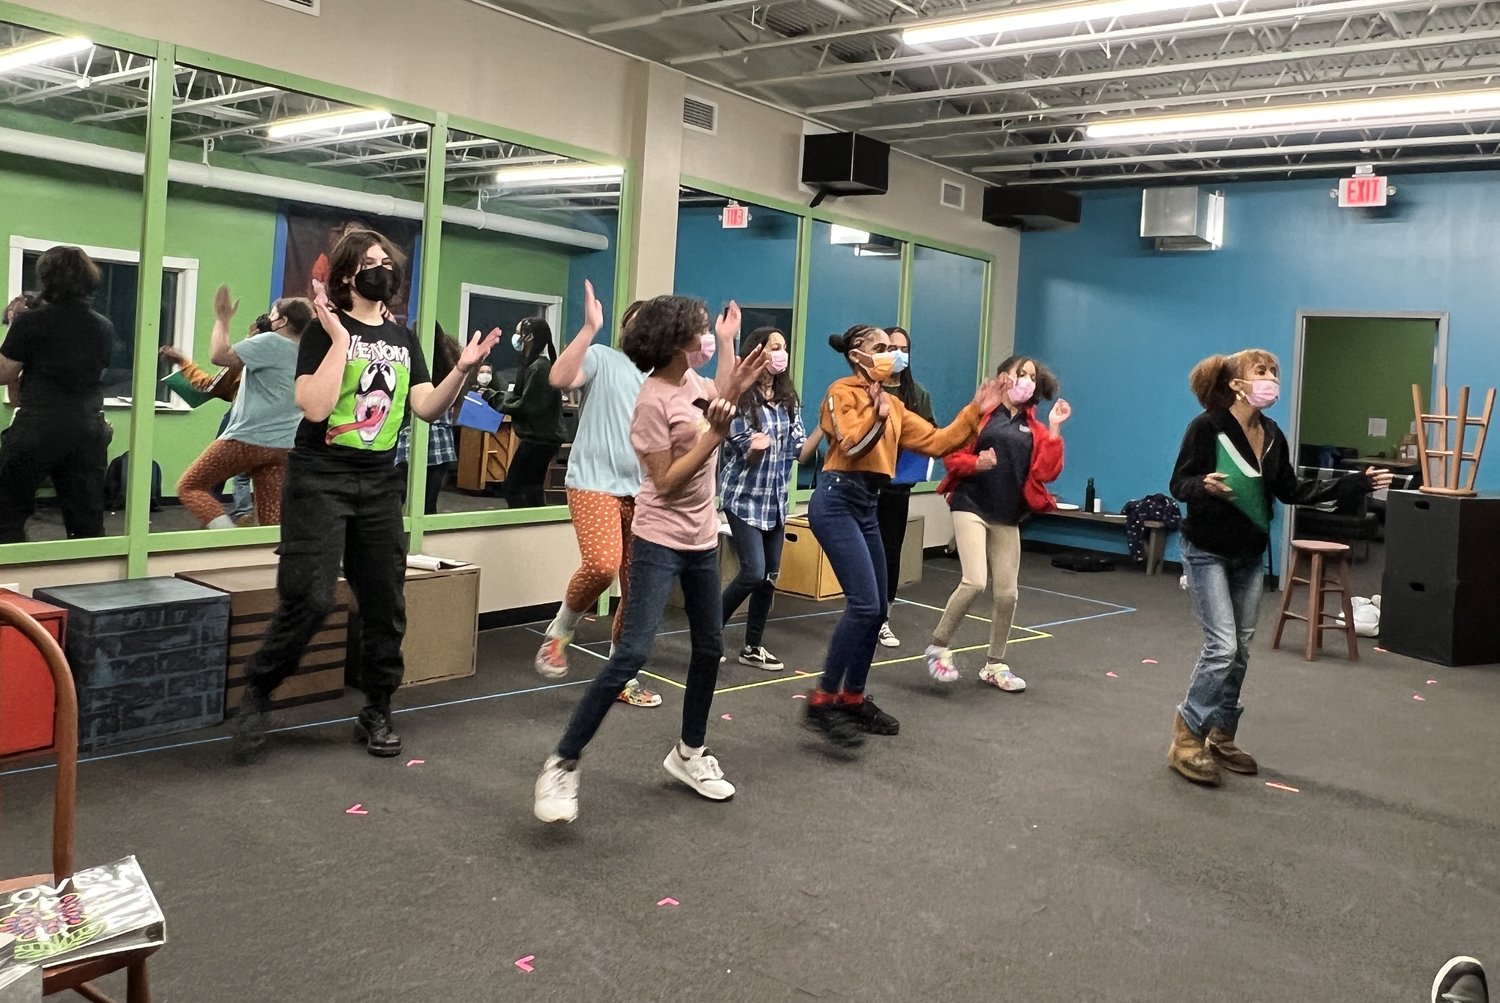 Cast rehearse a scene from “Inspired by Claudette & Rosa” at Youth Performance Company in January 2023. (Photo by Jill Boogren)